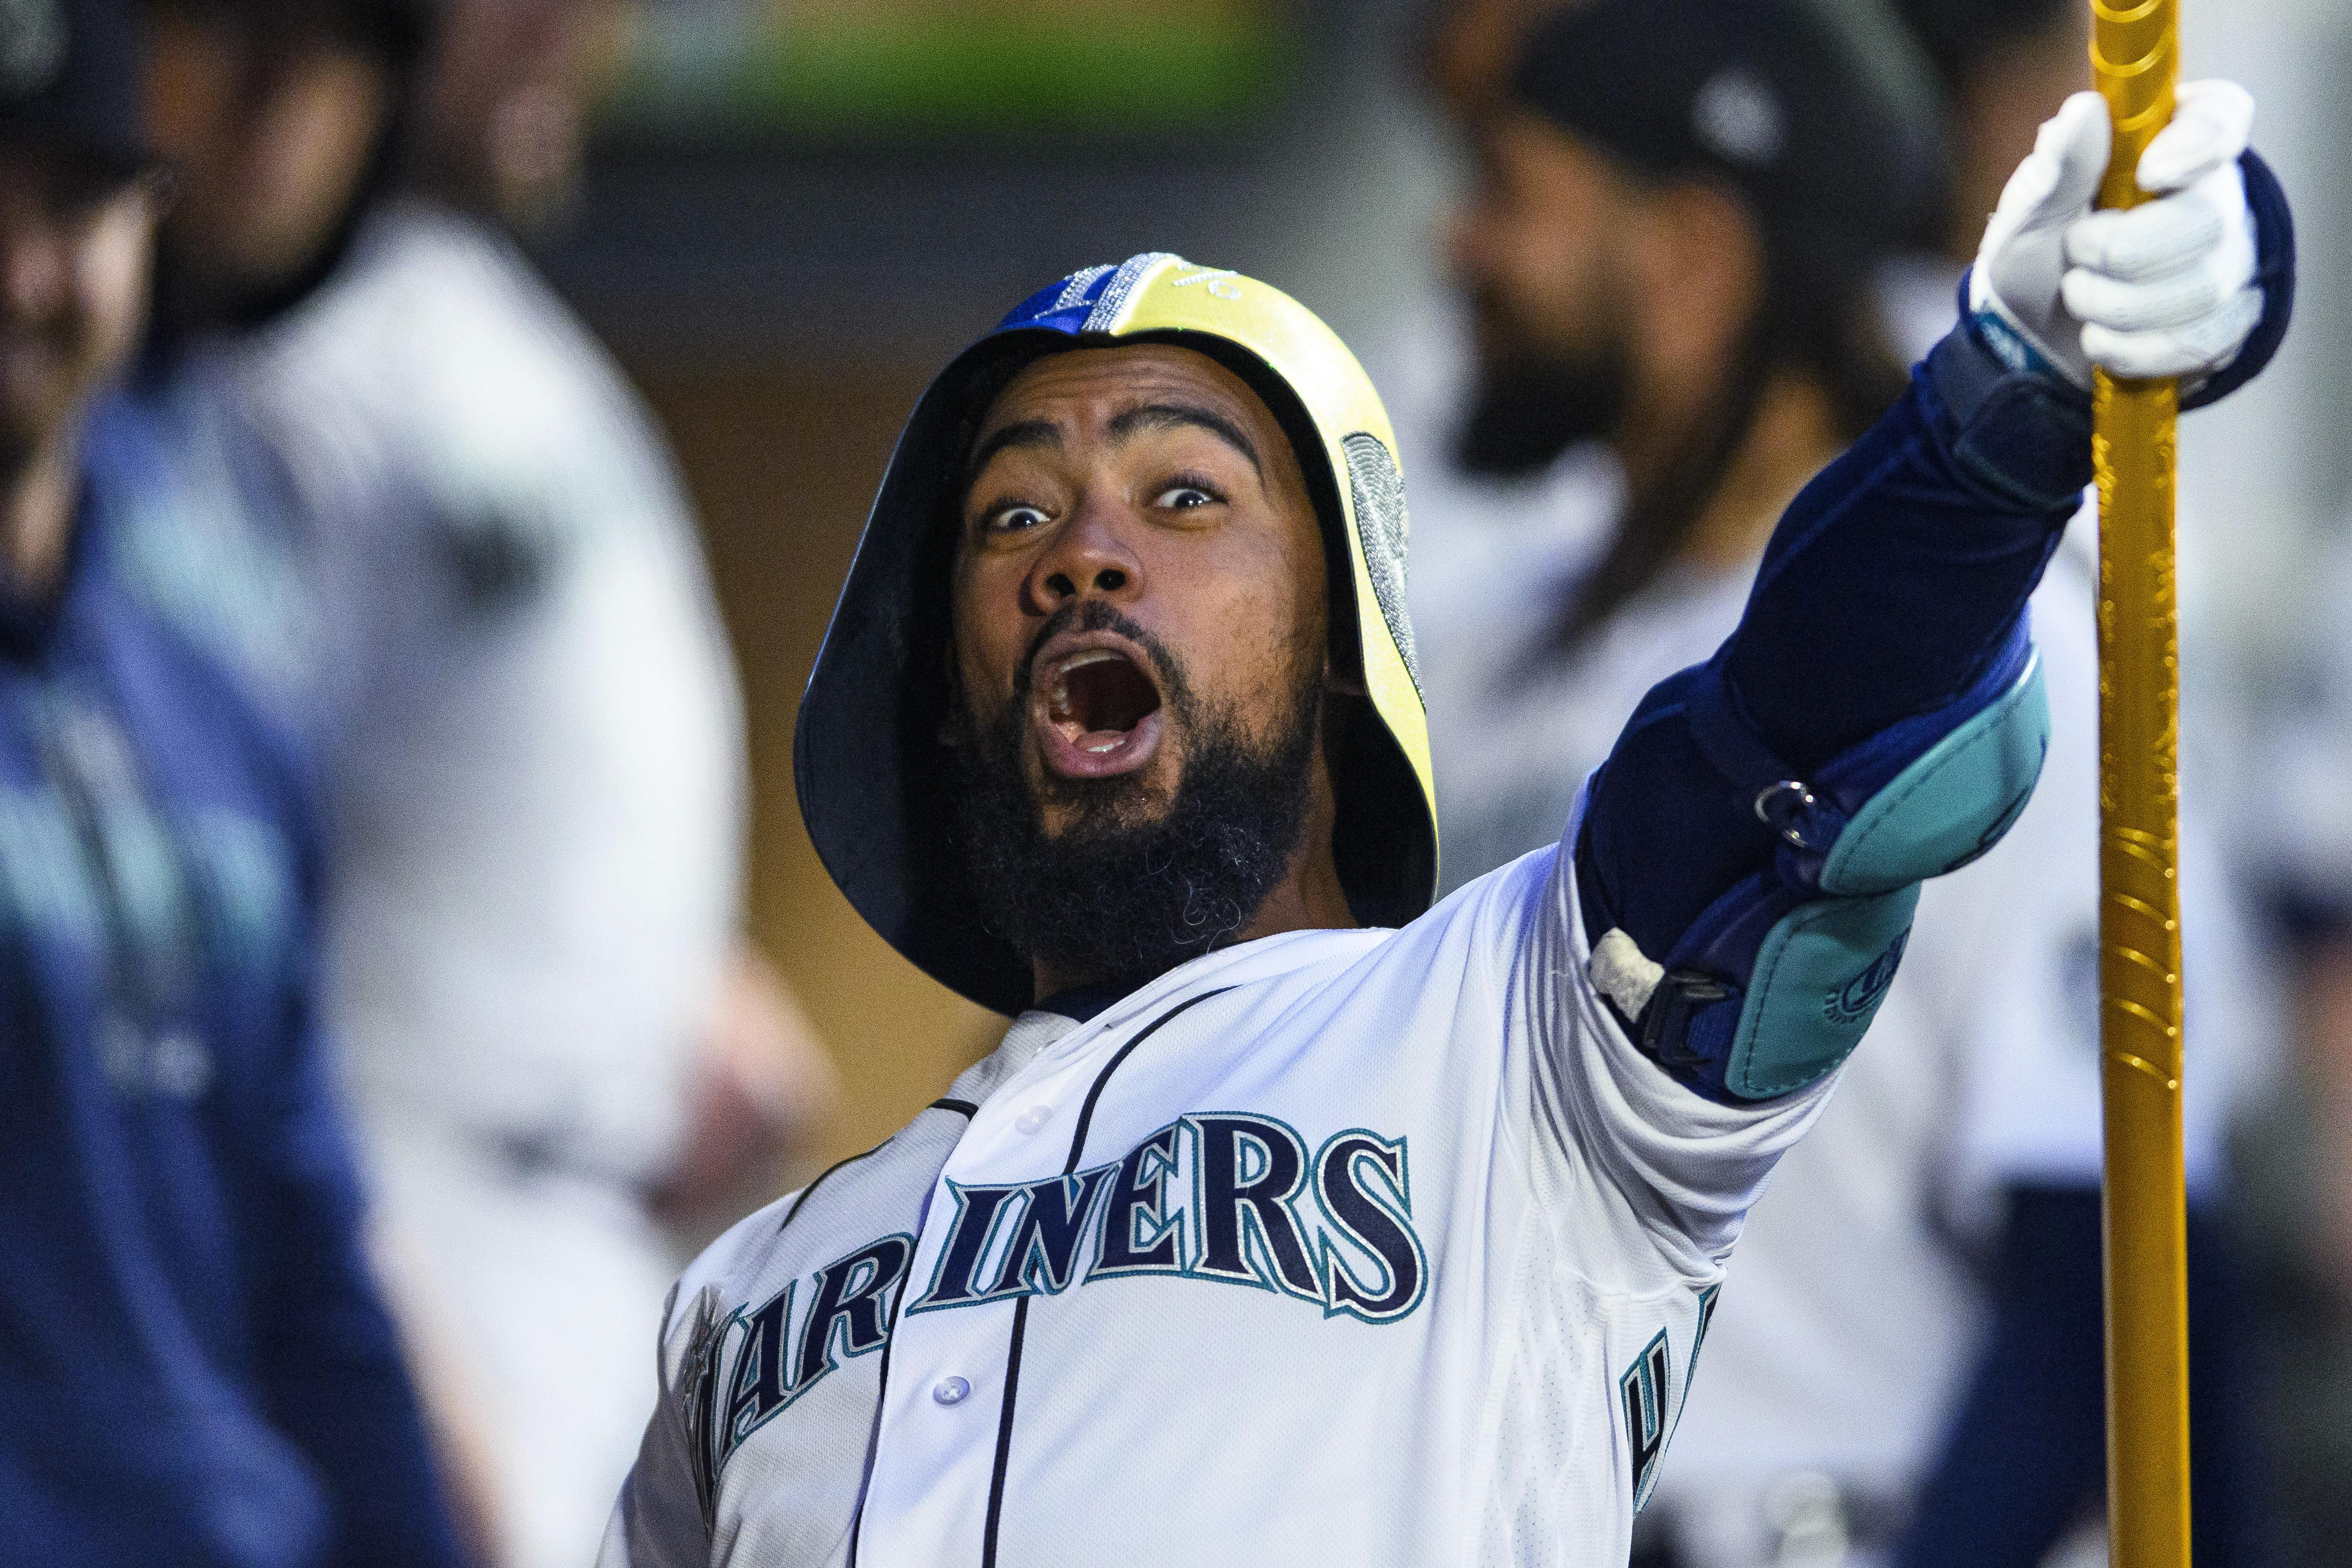 Sam Haggerty starts the chaos on the basepaths as Mariners score